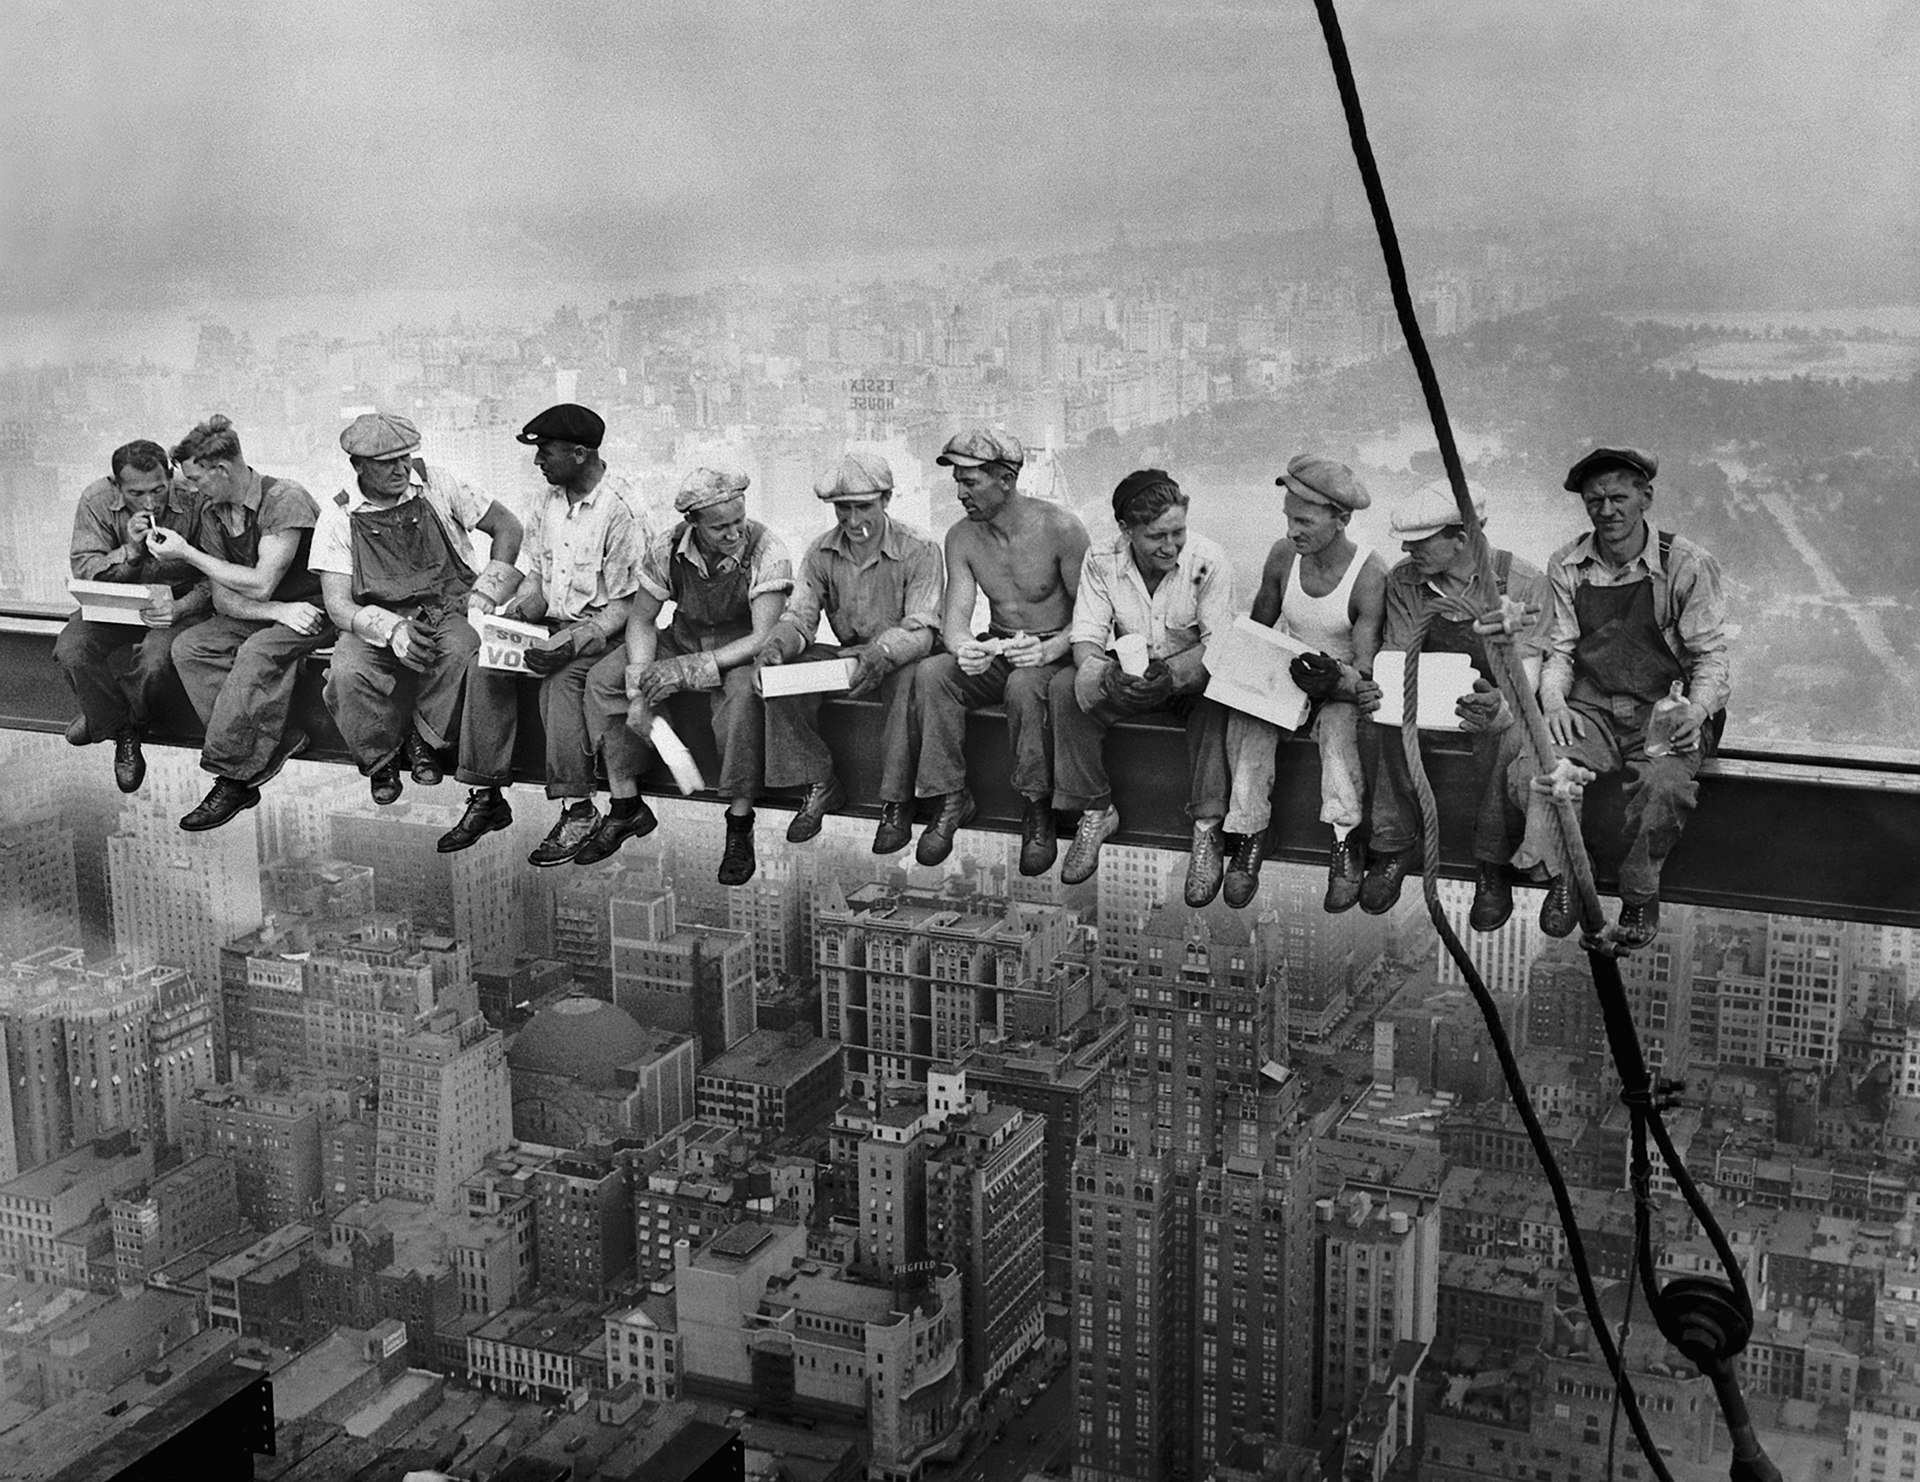 Charles Clyde Ebbets, Lunch atop a Skyscraper, 1932